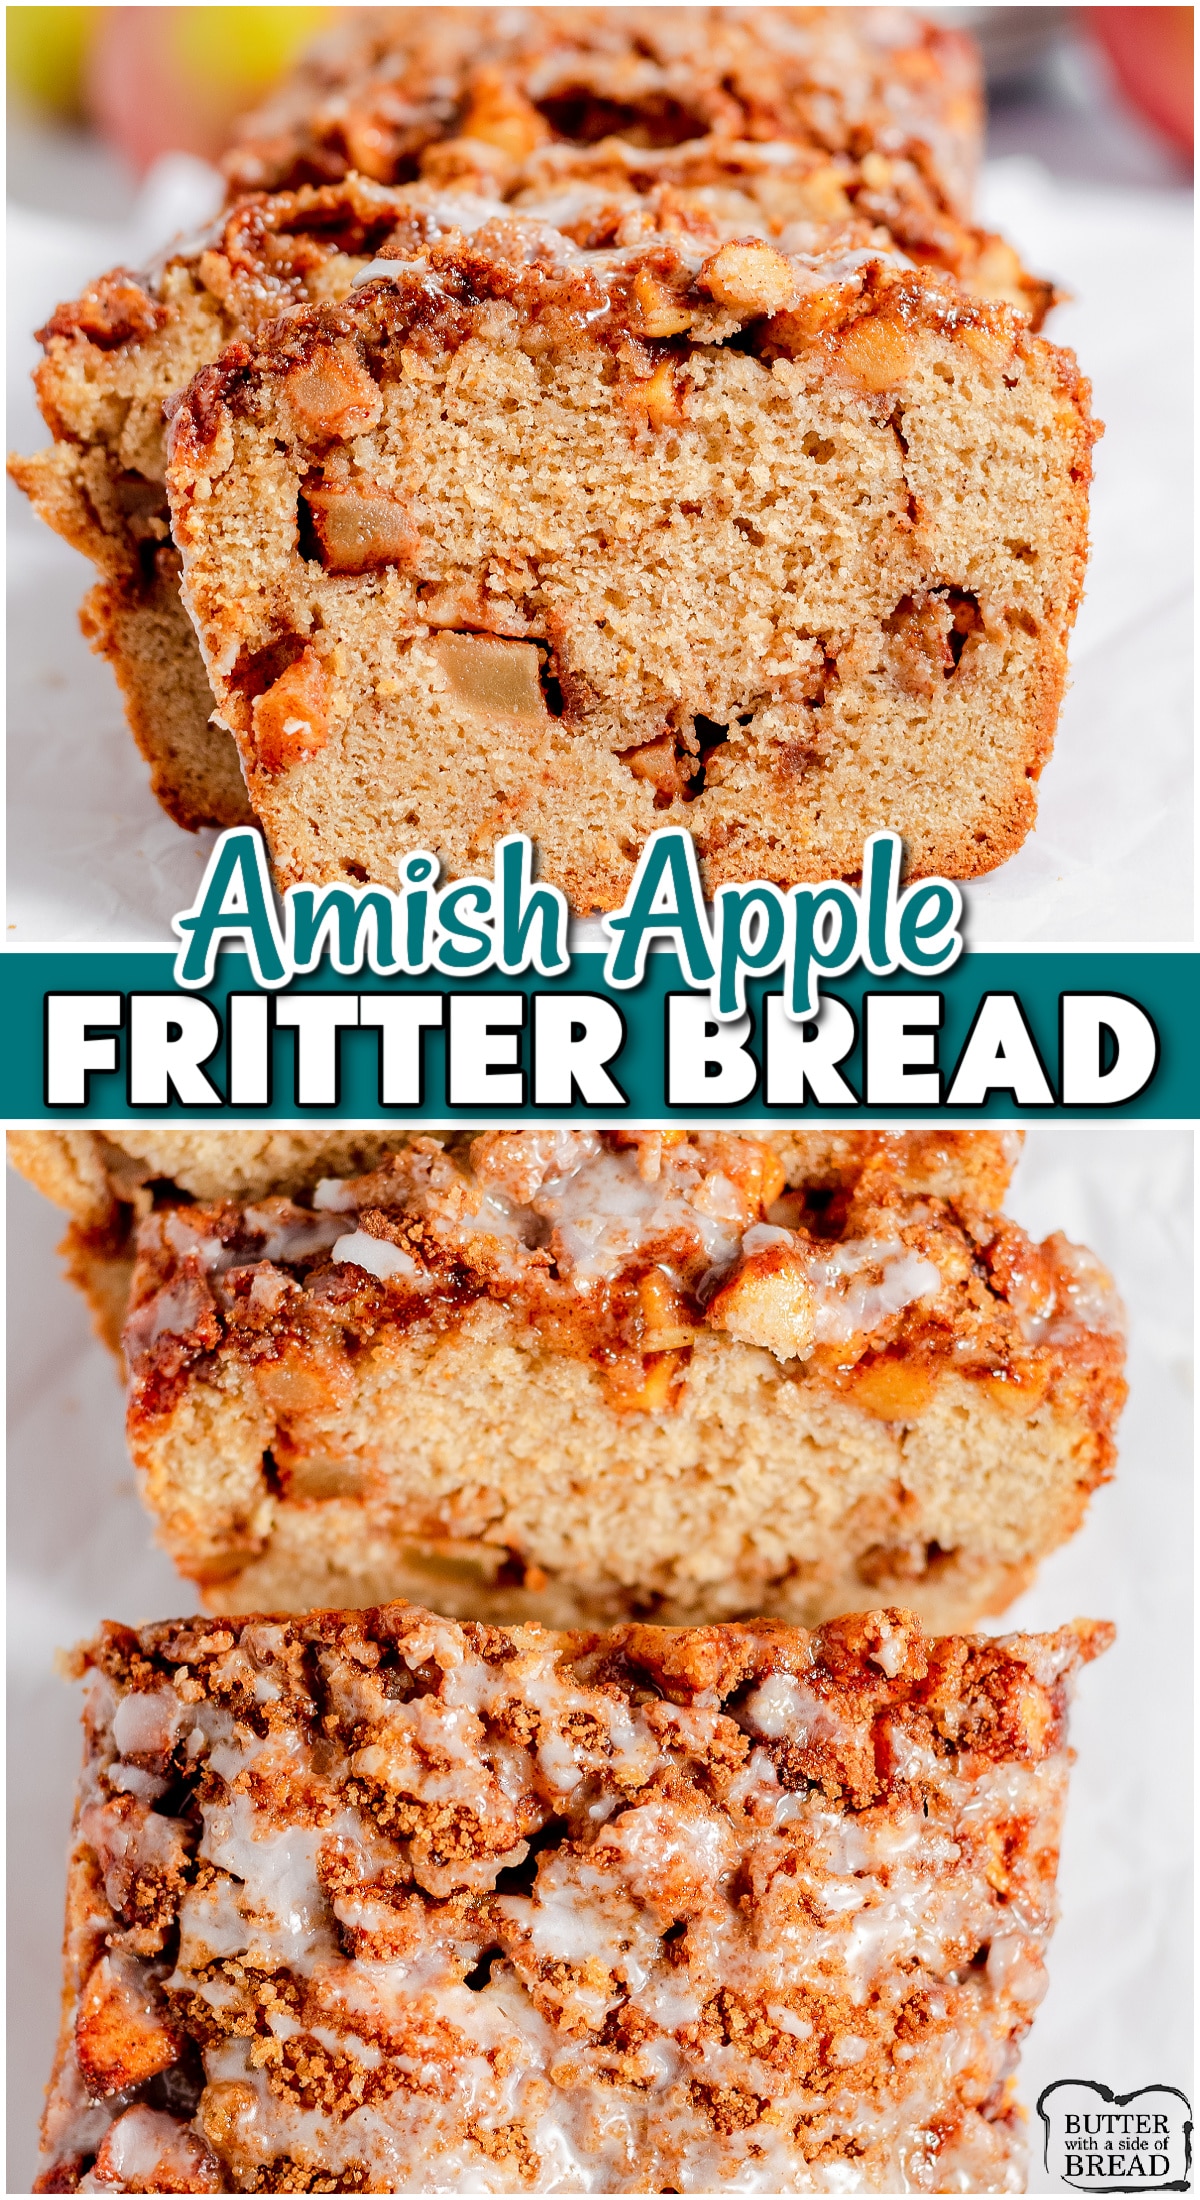 Amish Apple Fritter Bread uses classic ingredients like fresh apples, brown sugar, & butter that are baked into a spiced loaf & topped with sweet glaze! This apple cinnamon bread is a twist on the classic apple fritter donut, but in a soft bread form!